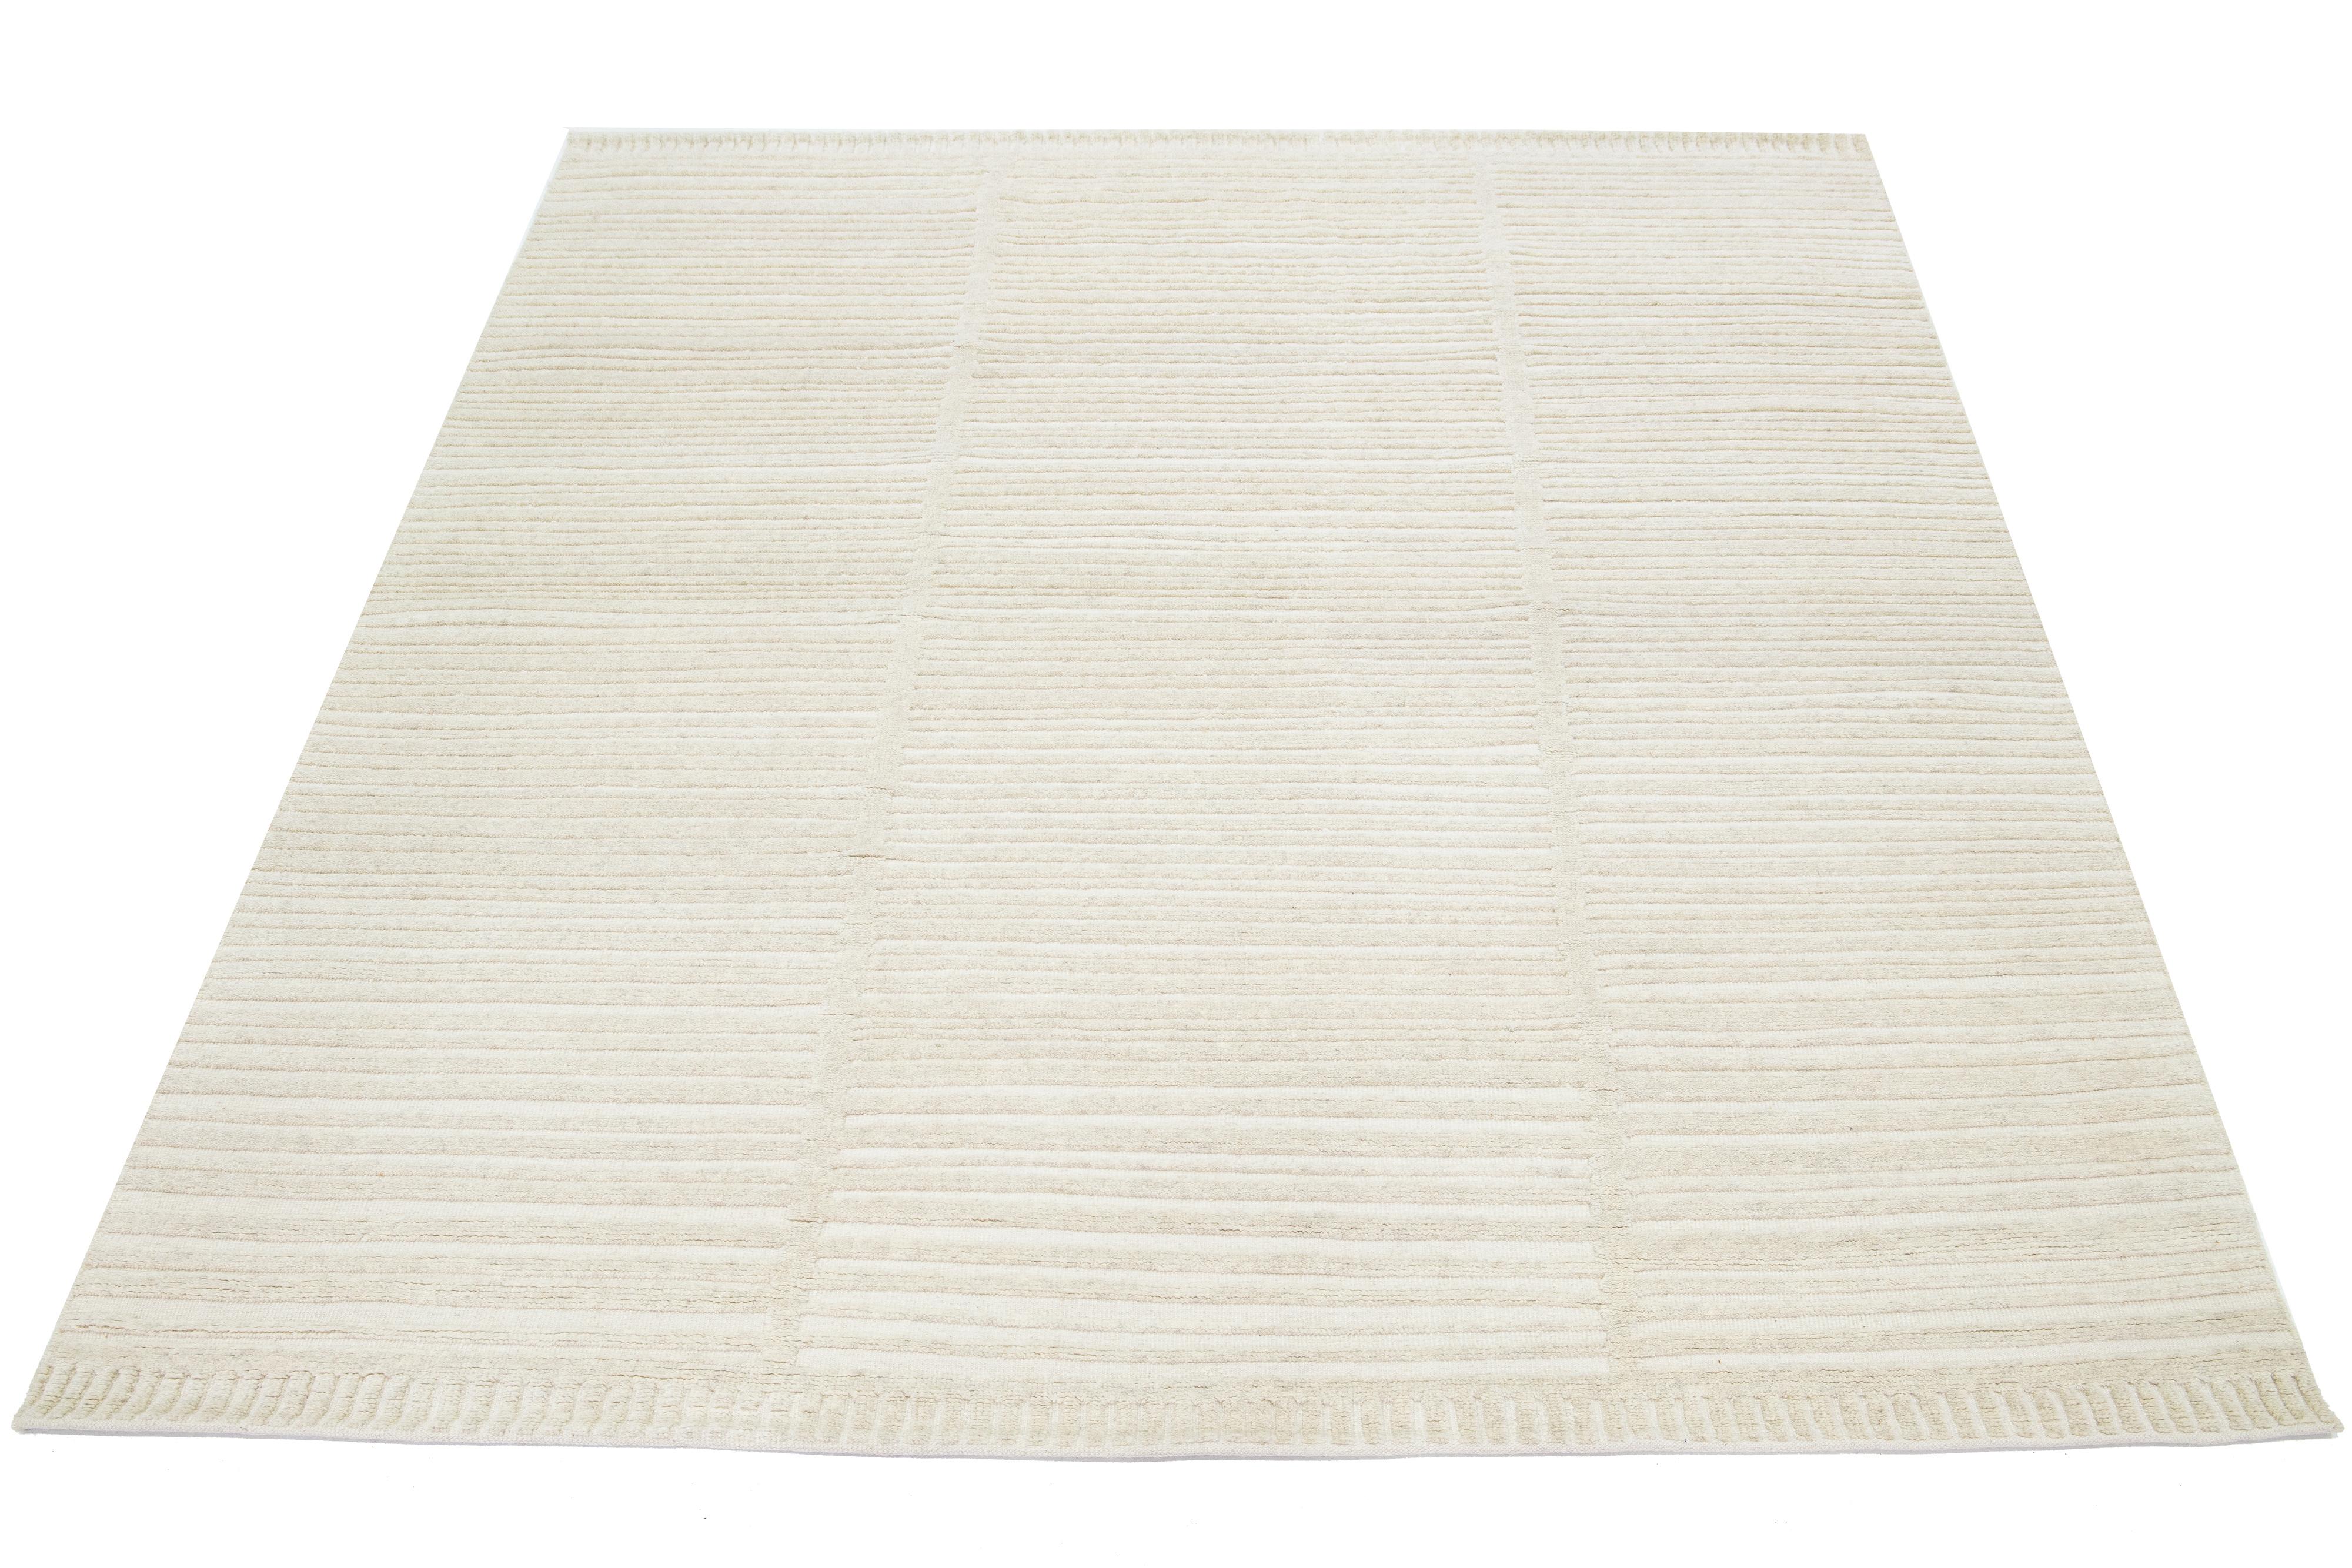 This Moroccan-style wool rug is hand-knotted and showcases a beautiful modern design with a natural ivory field. It features a stunning striped pattern.

This rug measures 8' x 10'.